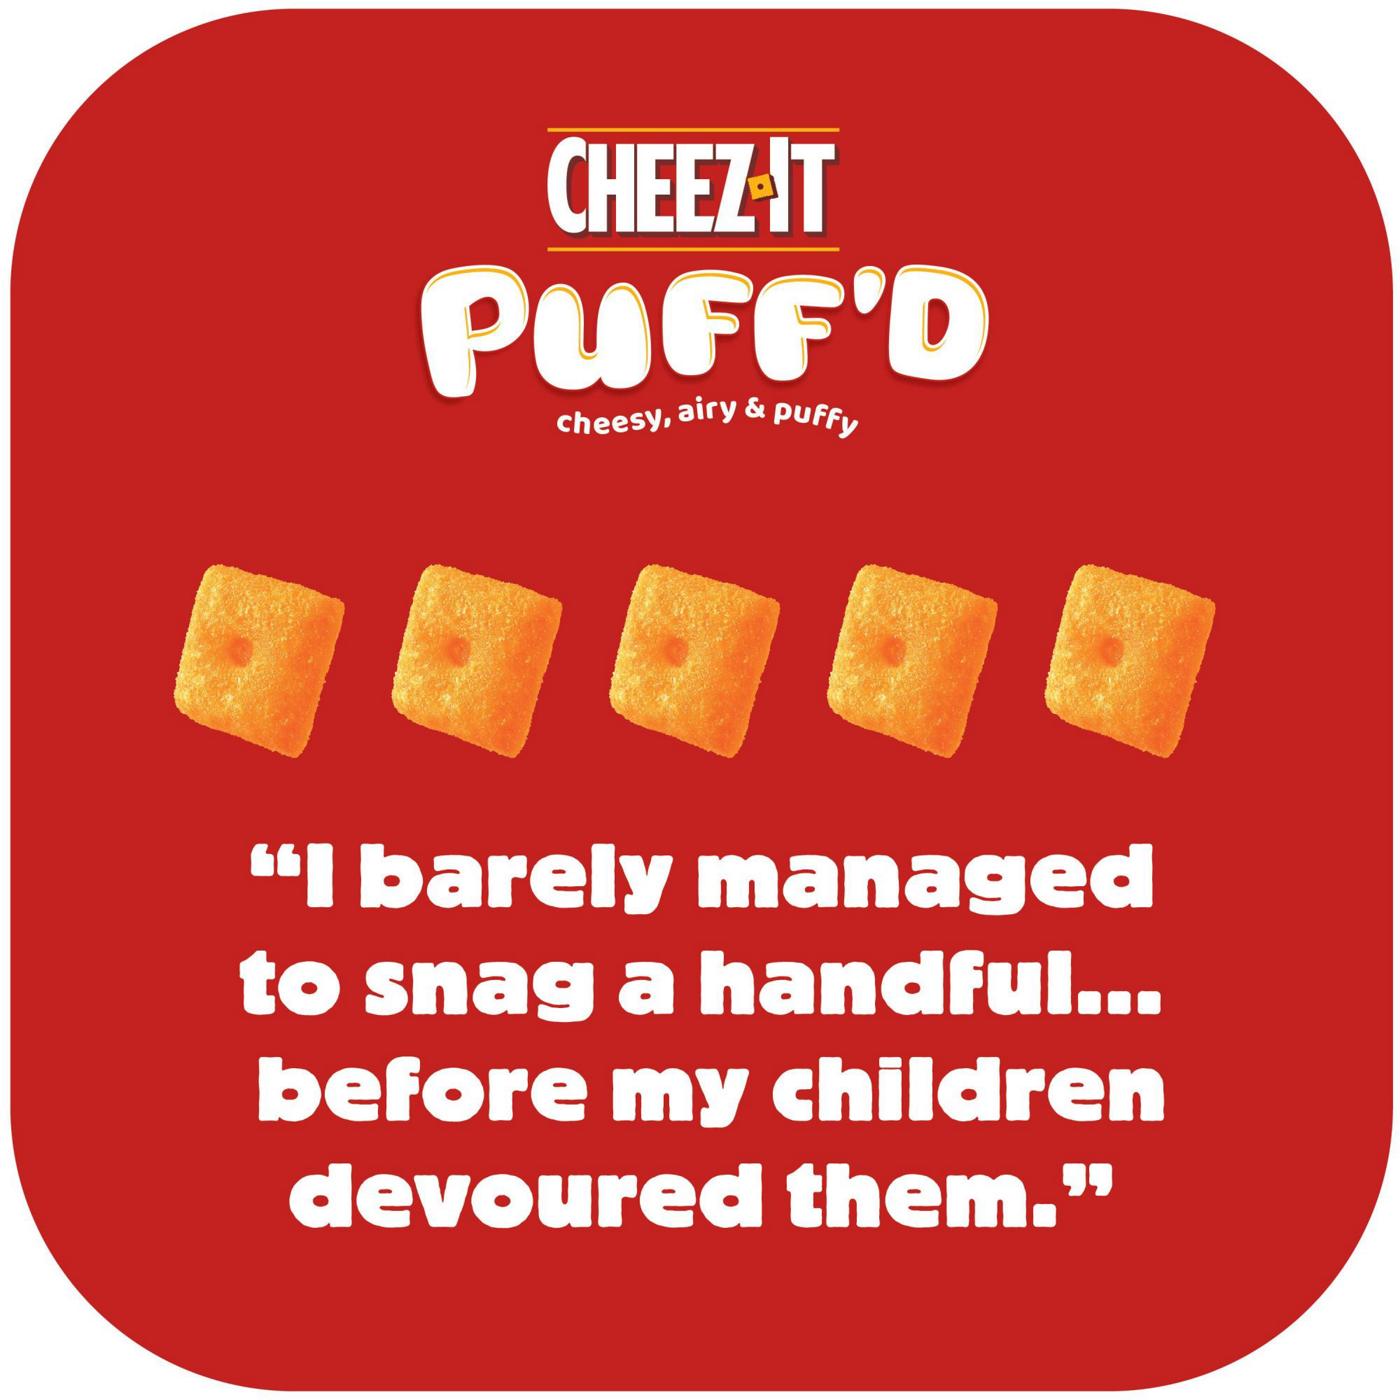 Cheez-It Puff'd Double Cheese Cheesy Baked Snacks; image 3 of 5